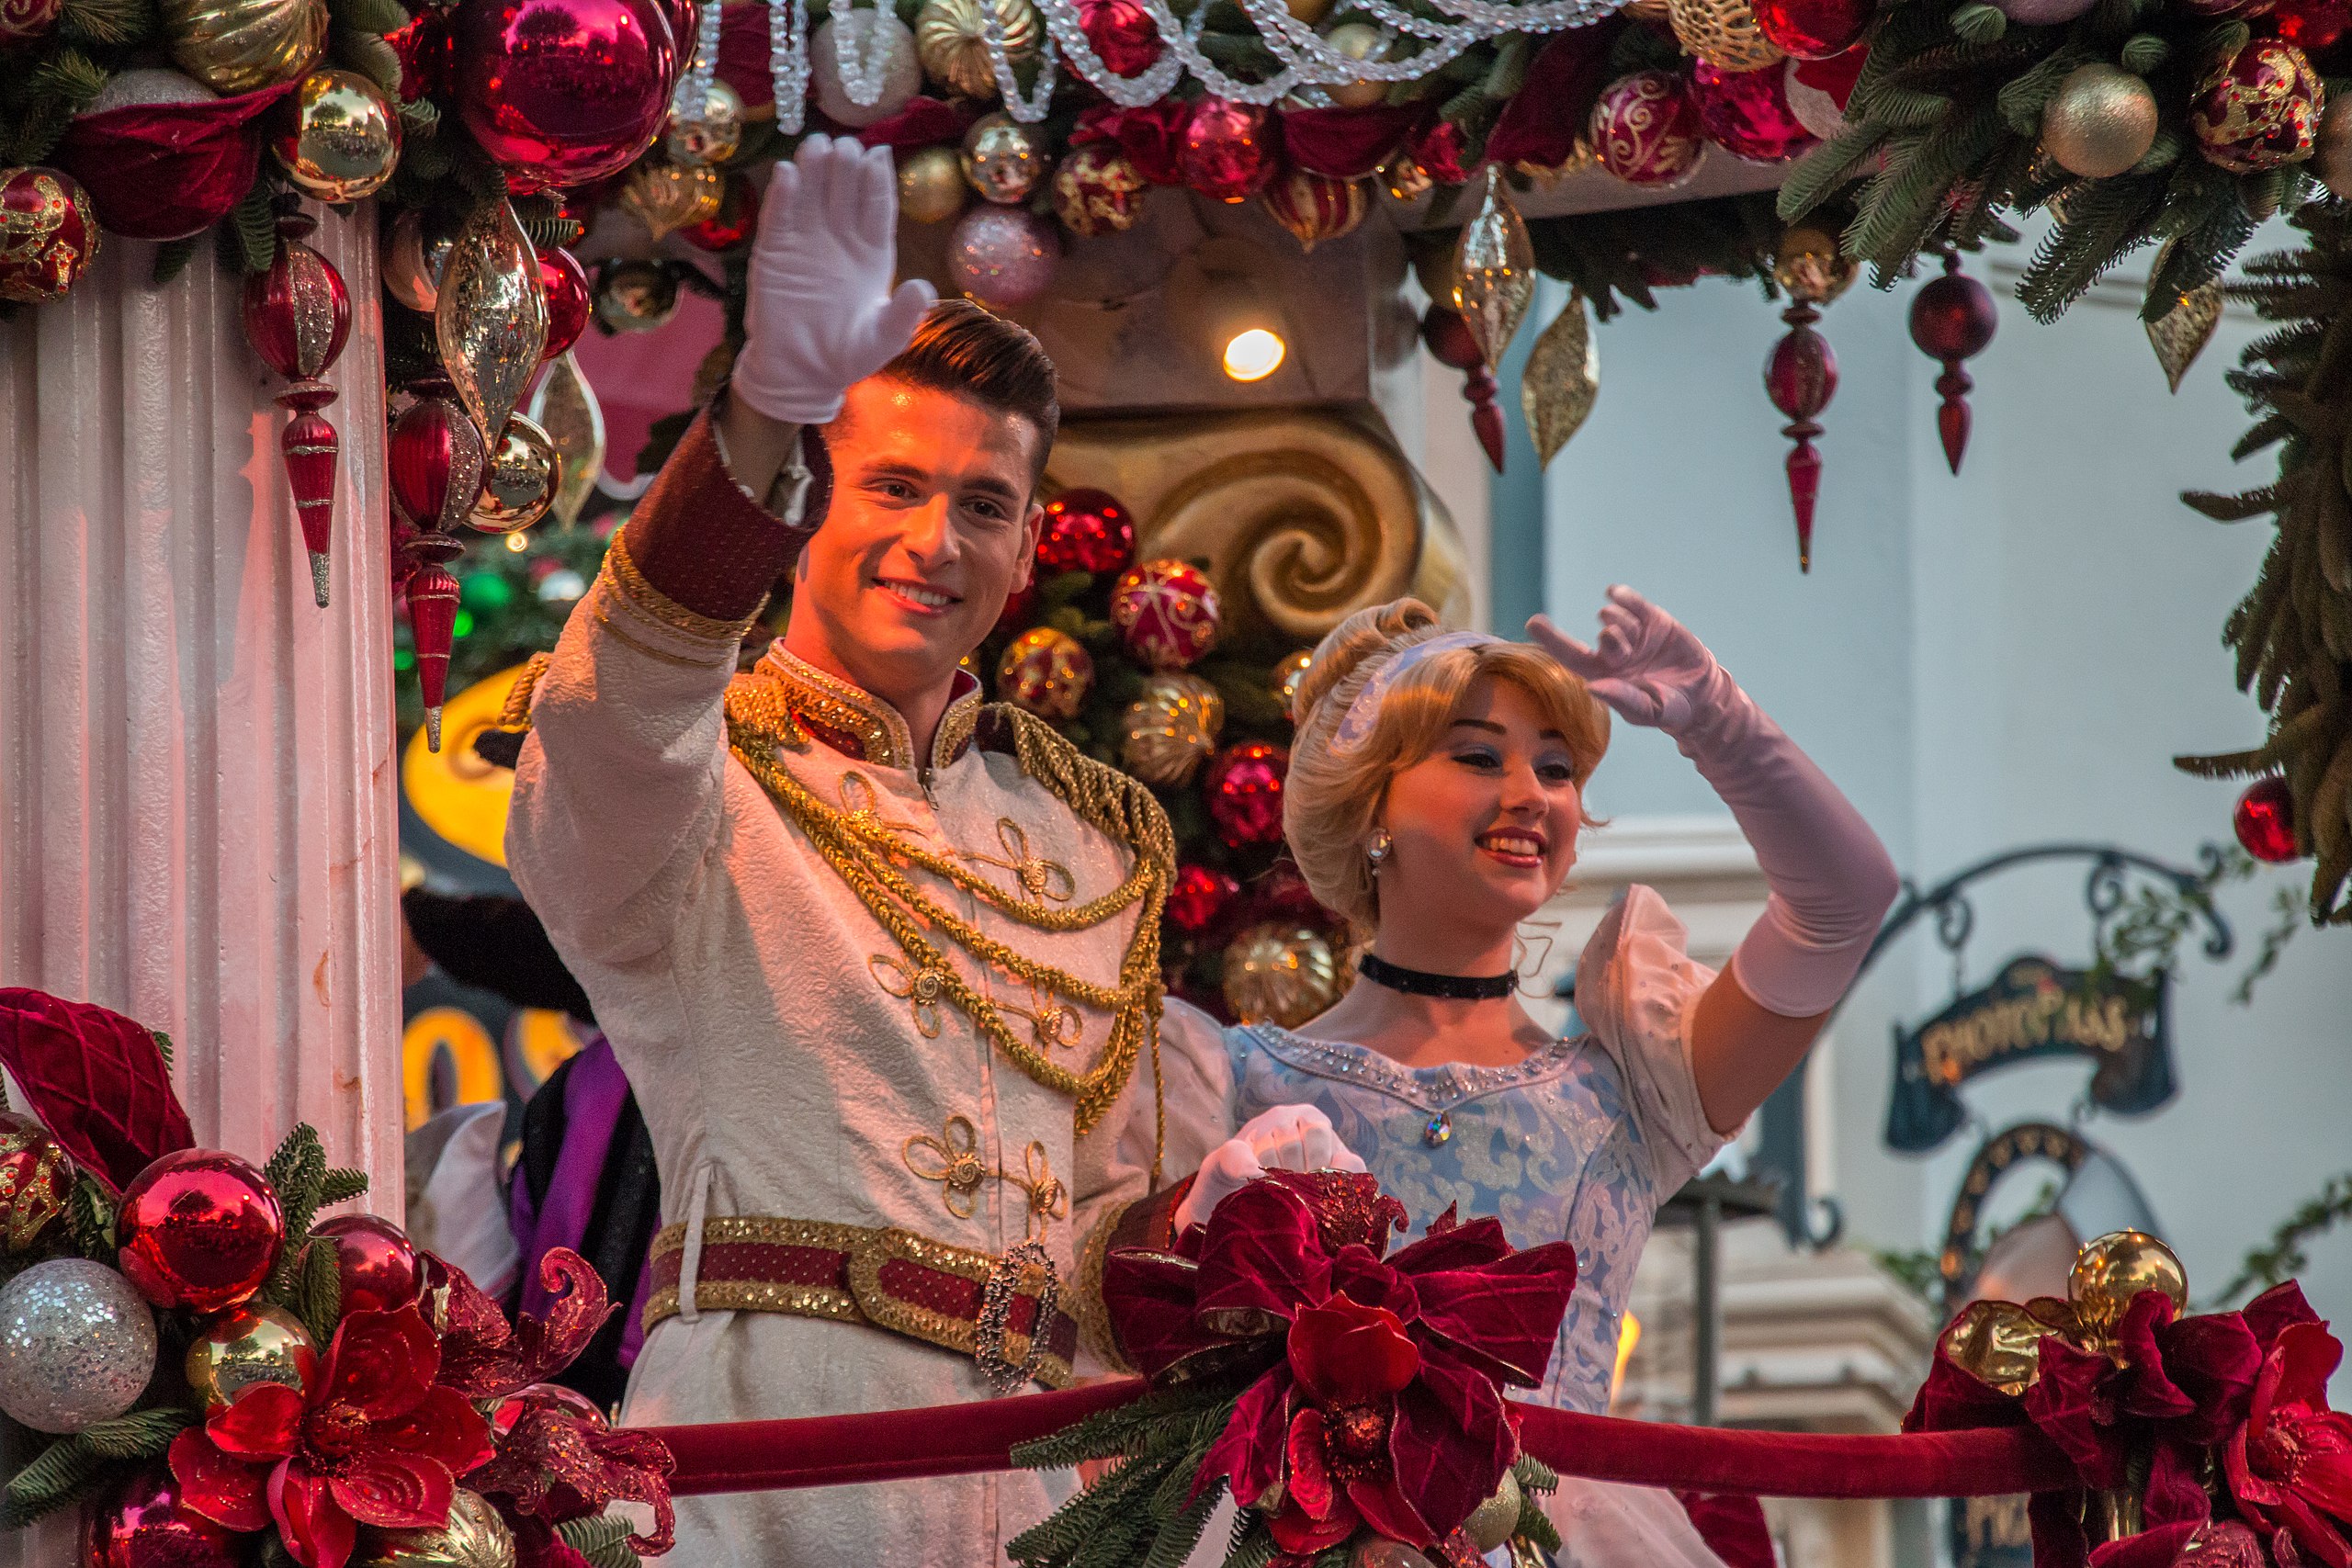 Prince Charming and Cinderella wave on top of a float.